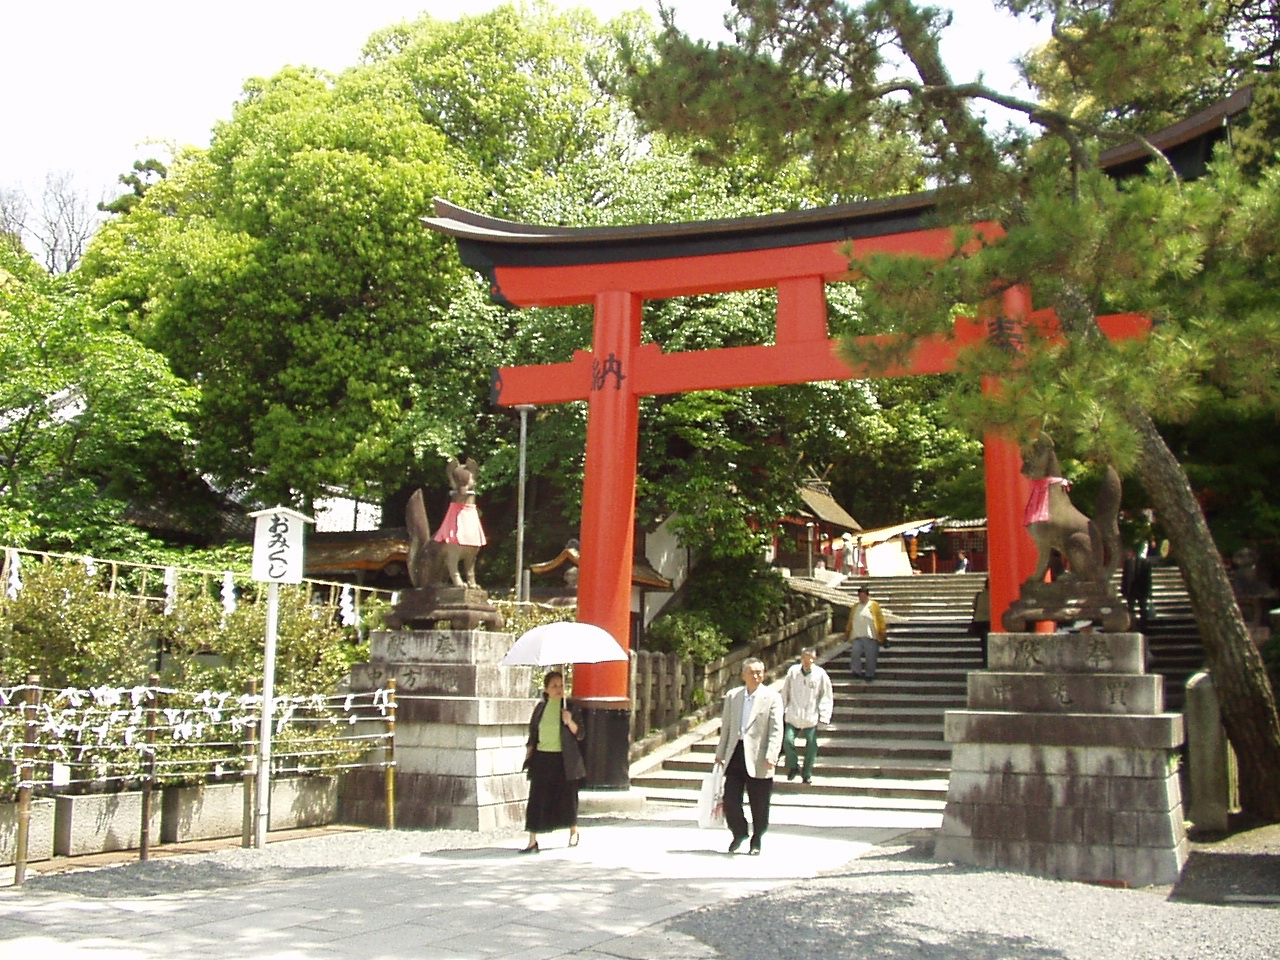 the asian gate features a tori tori tori shrine and people carrying umbrellas